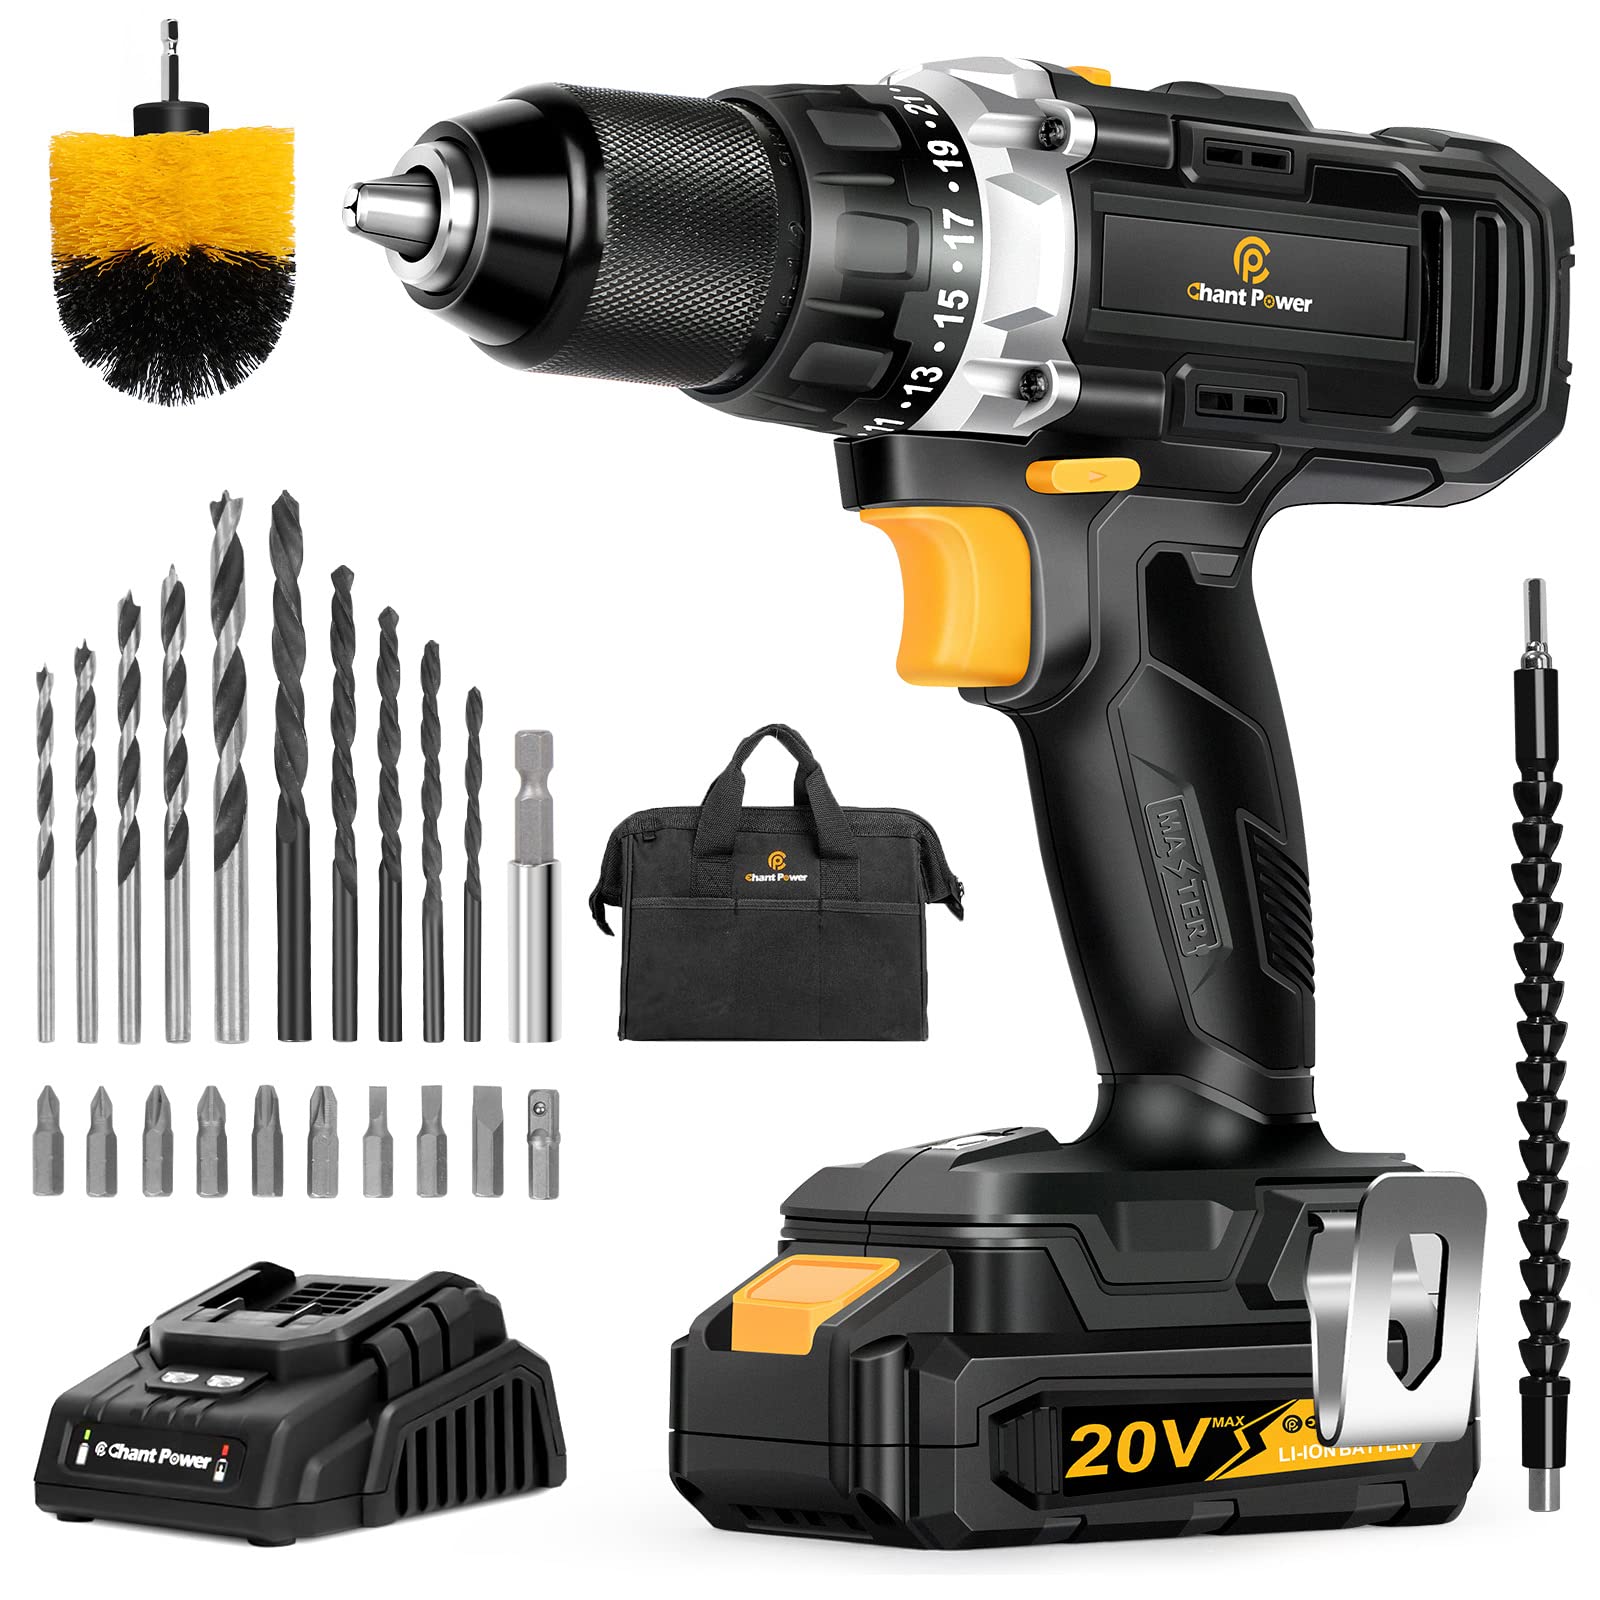 20V MAX Lithium-ion Cordless Drill Driver Set with 23+1 Clutch, Dual Speed, 1/2” (13 mm) Chuck for Drilling Wood, Metal, Charger, Canvas Bag, Flexible Shafts Included, C P CHANTPOWER